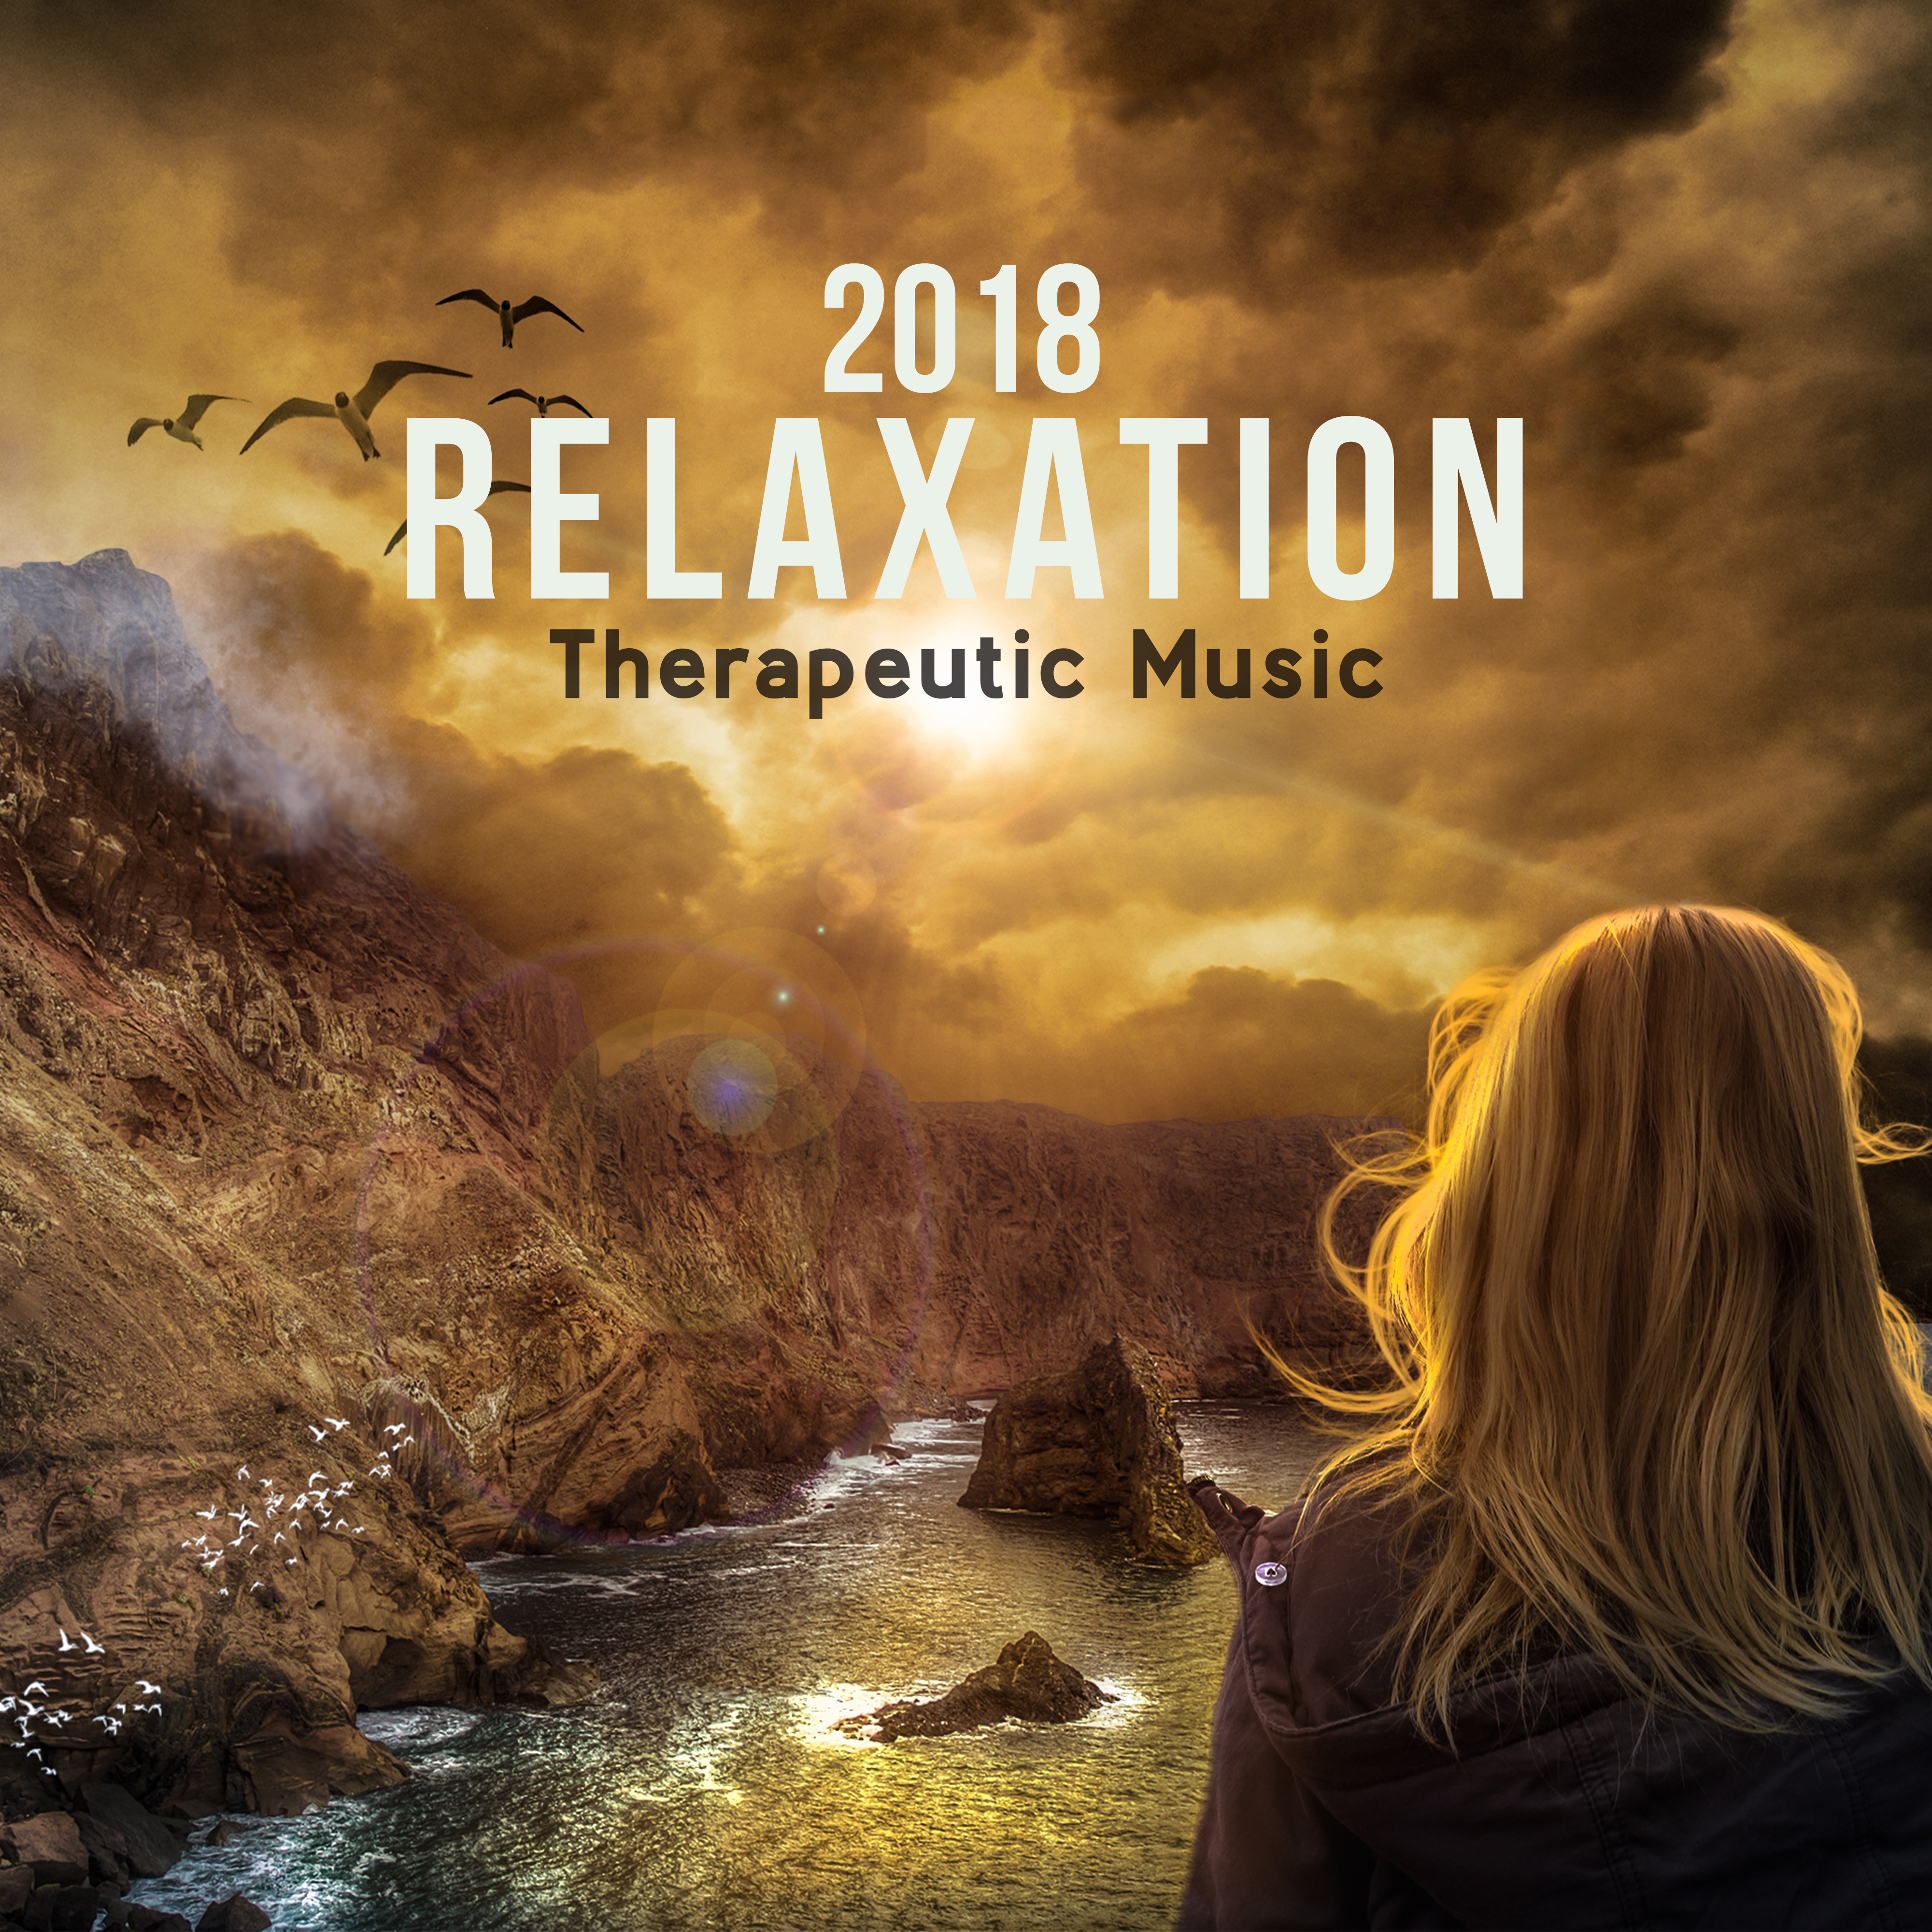 2018 Relaxation Therapeutic Music